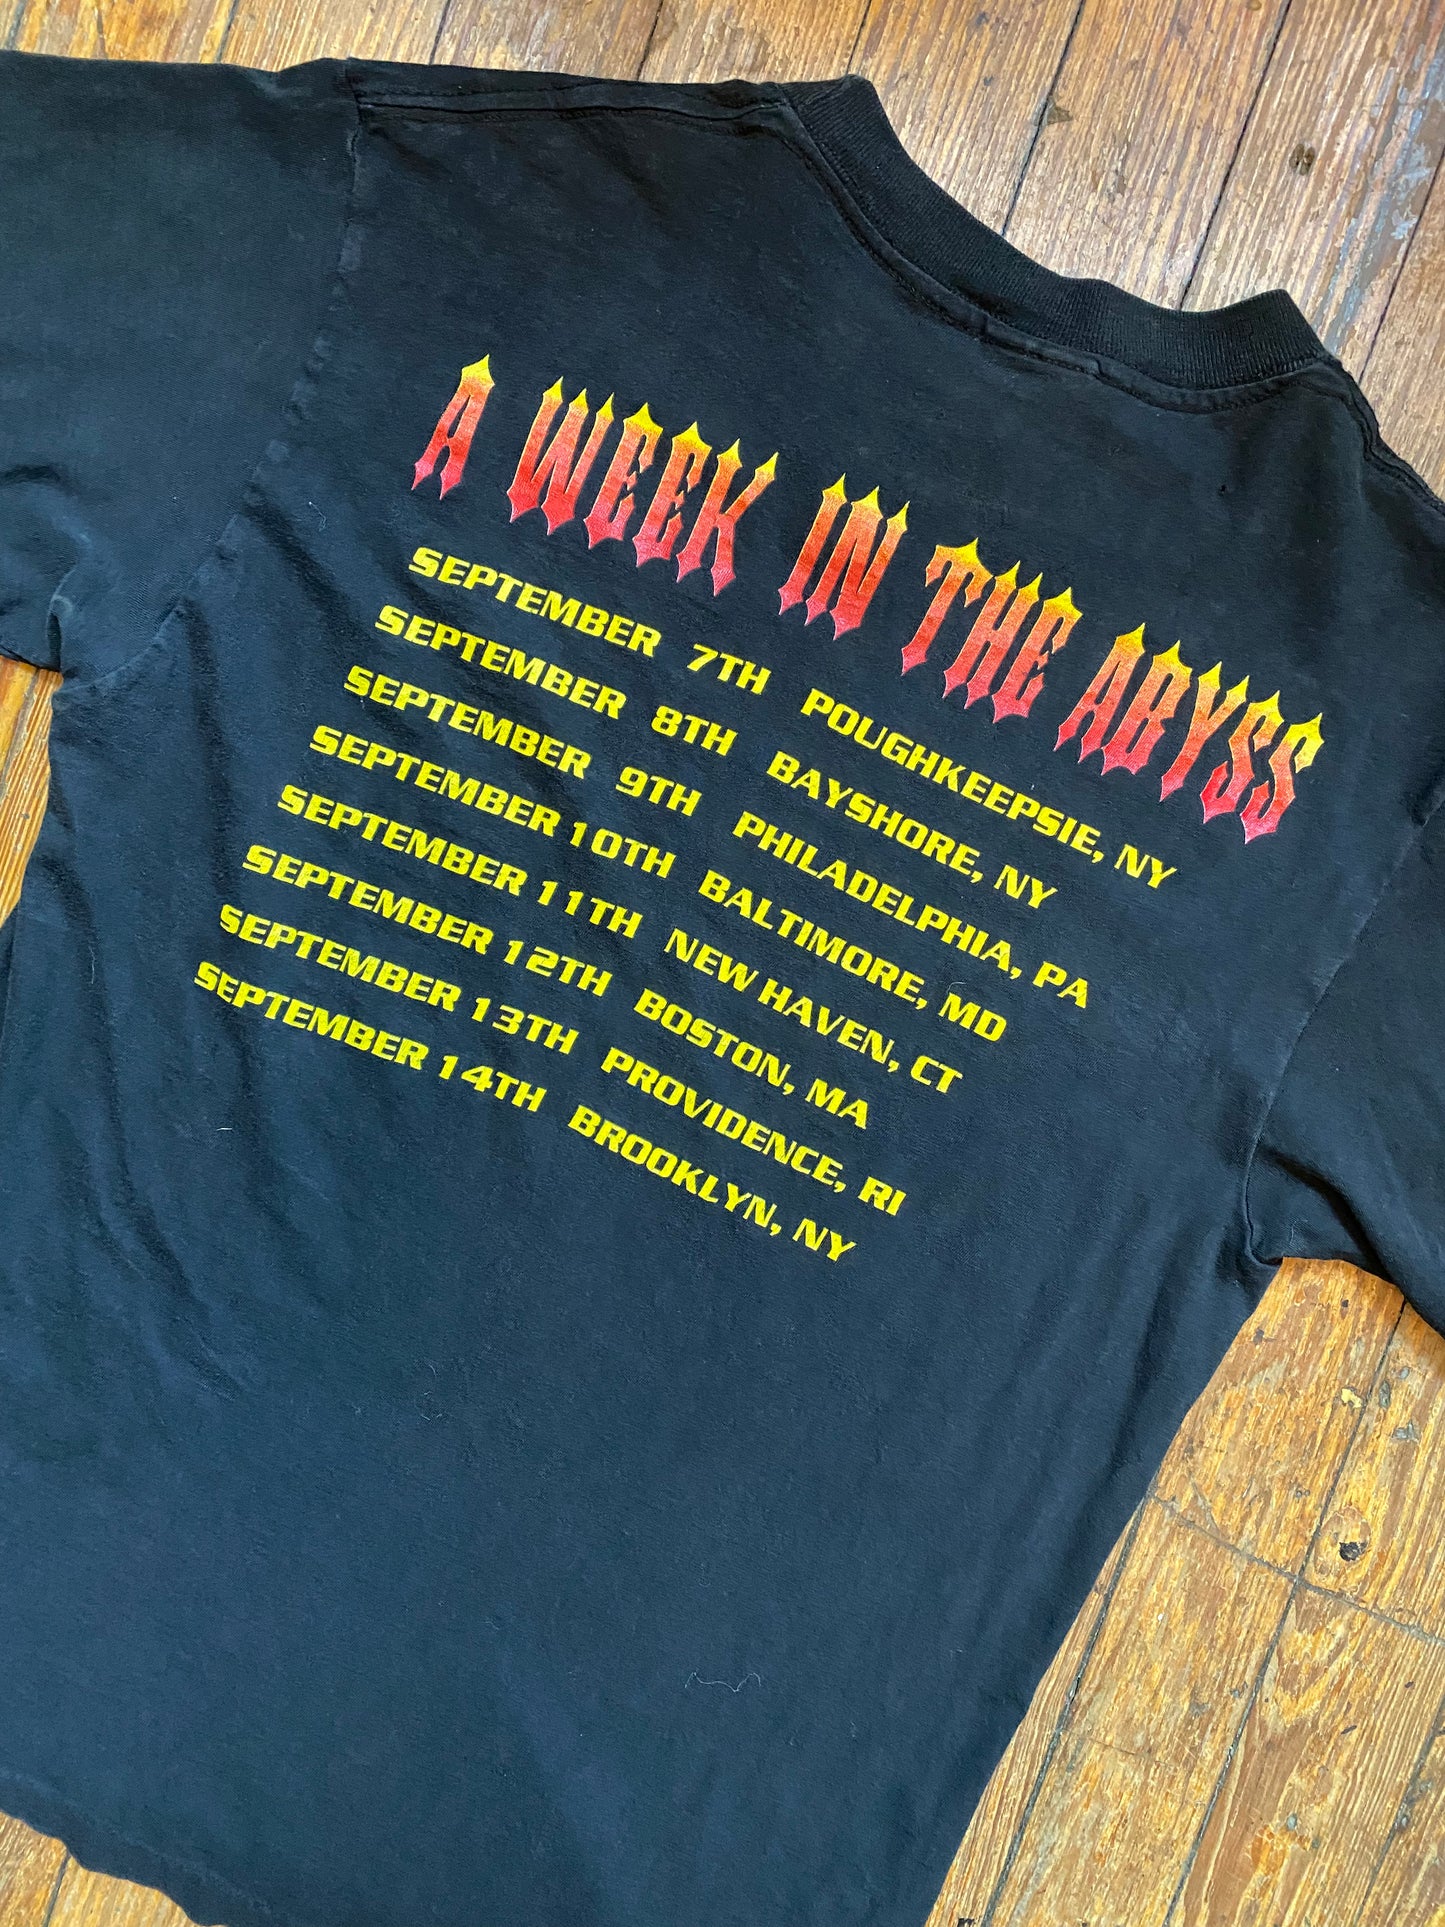 Vintage 1990 Slayer “A Week in the Abyss” Tour Shirt